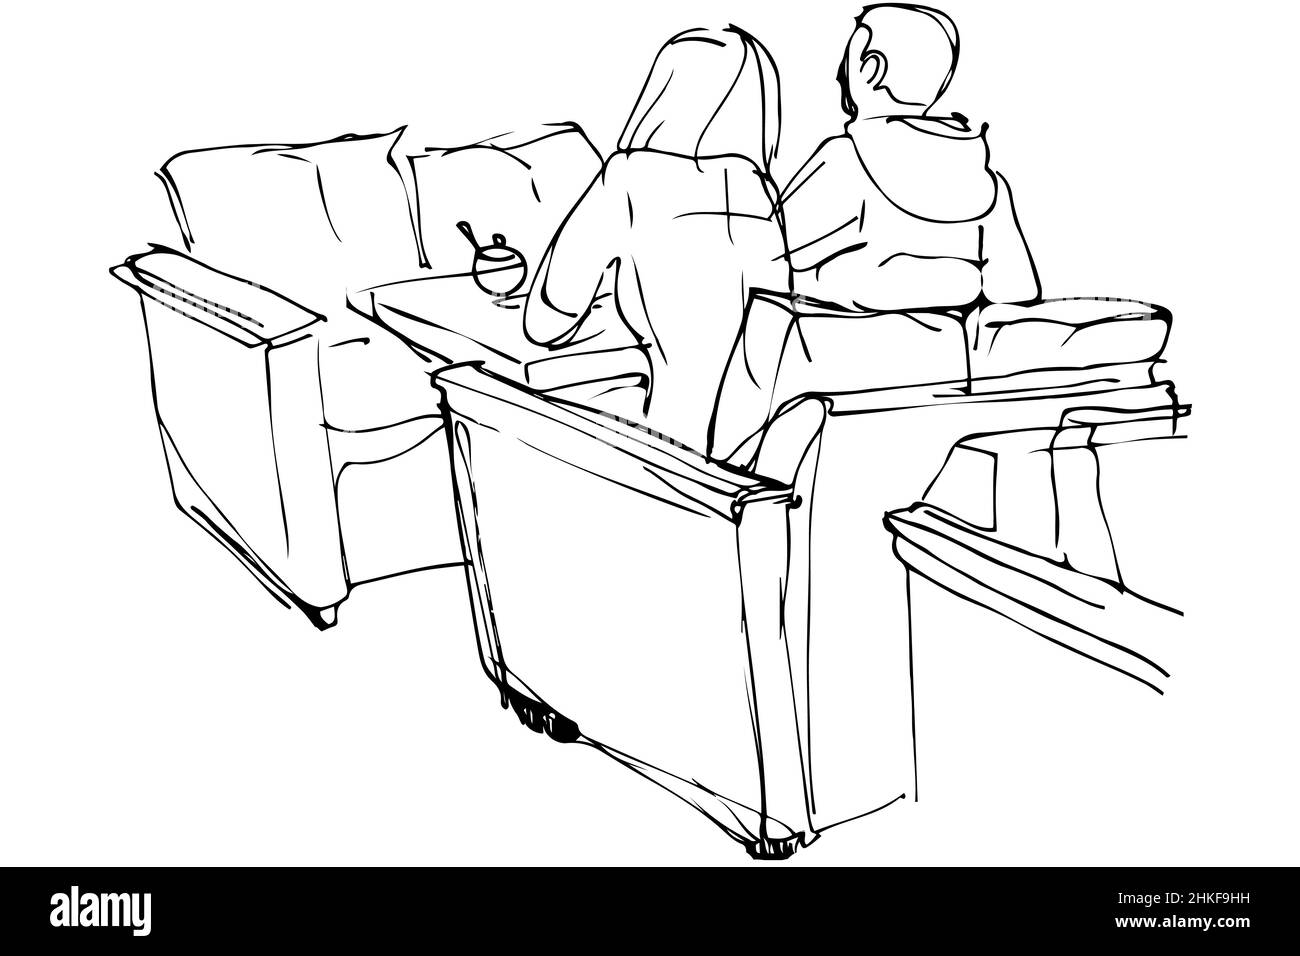 black and white vector sketch of man and woman sitting on a couch in a cafe Stock Photo